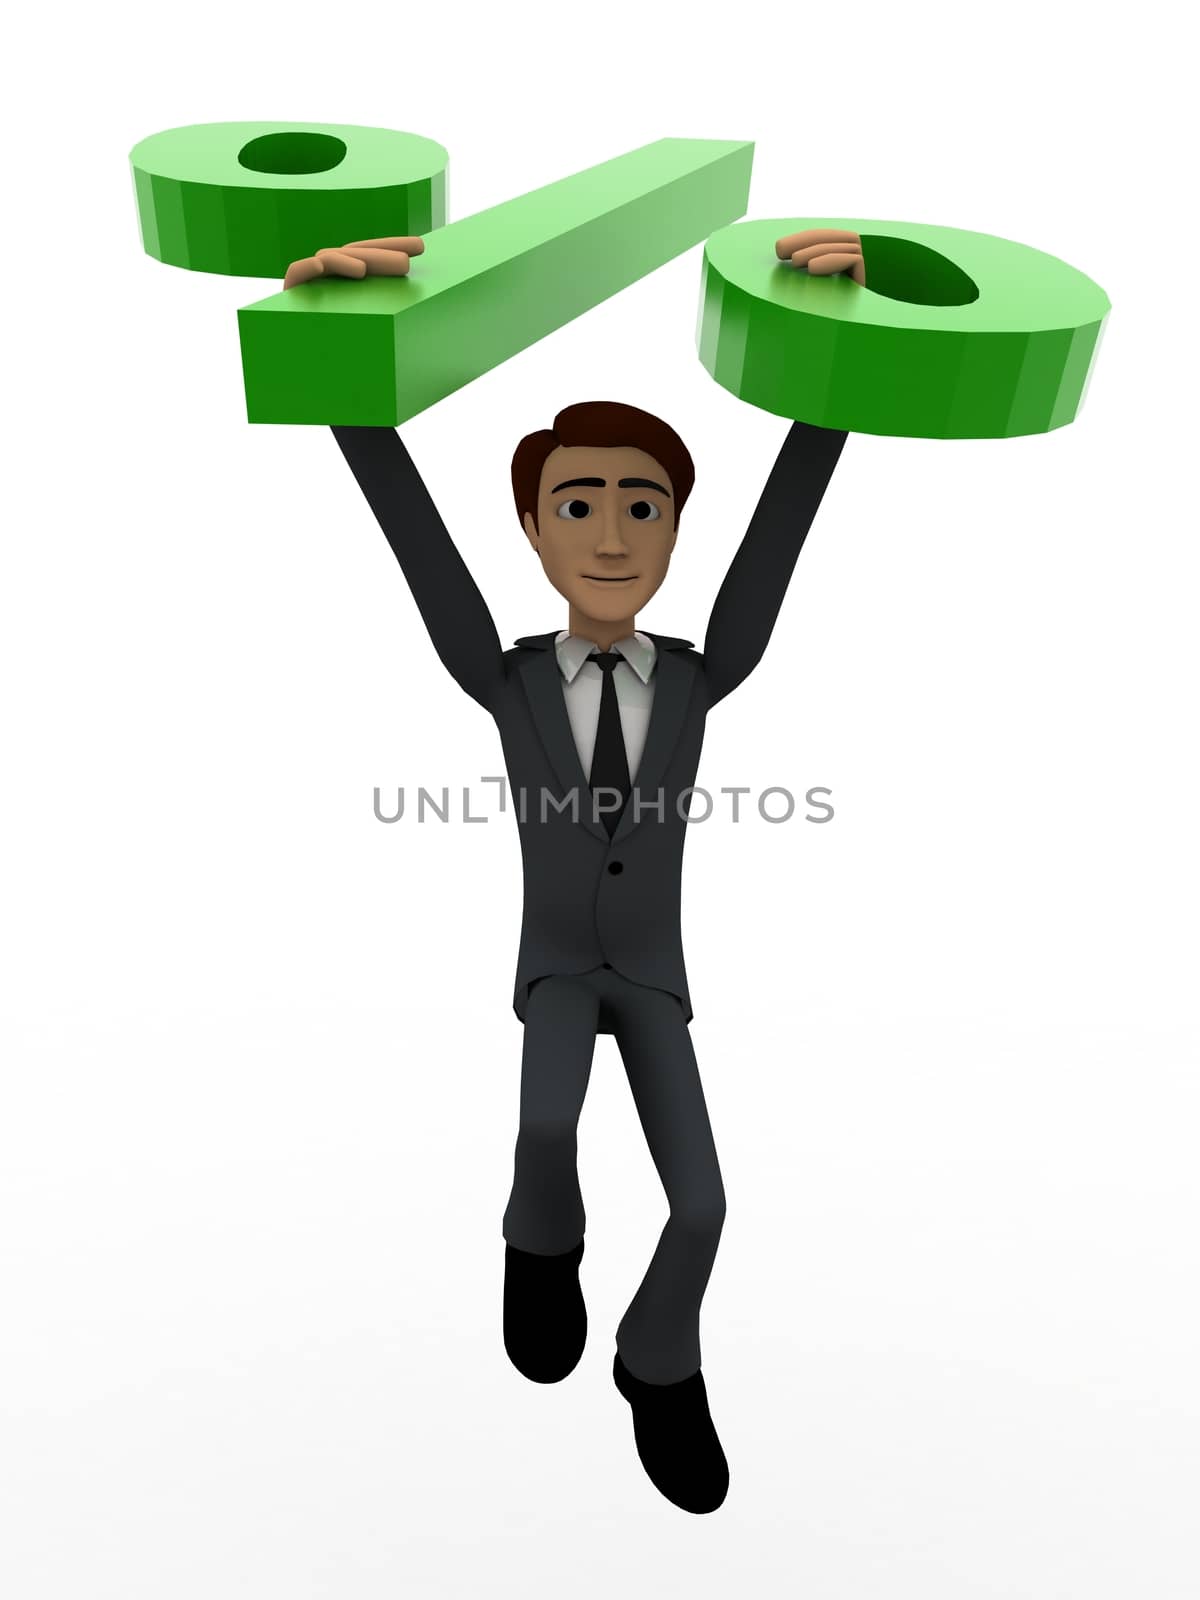 3d man jumping with big green percent symbol concept by touchmenithin@gmail.com